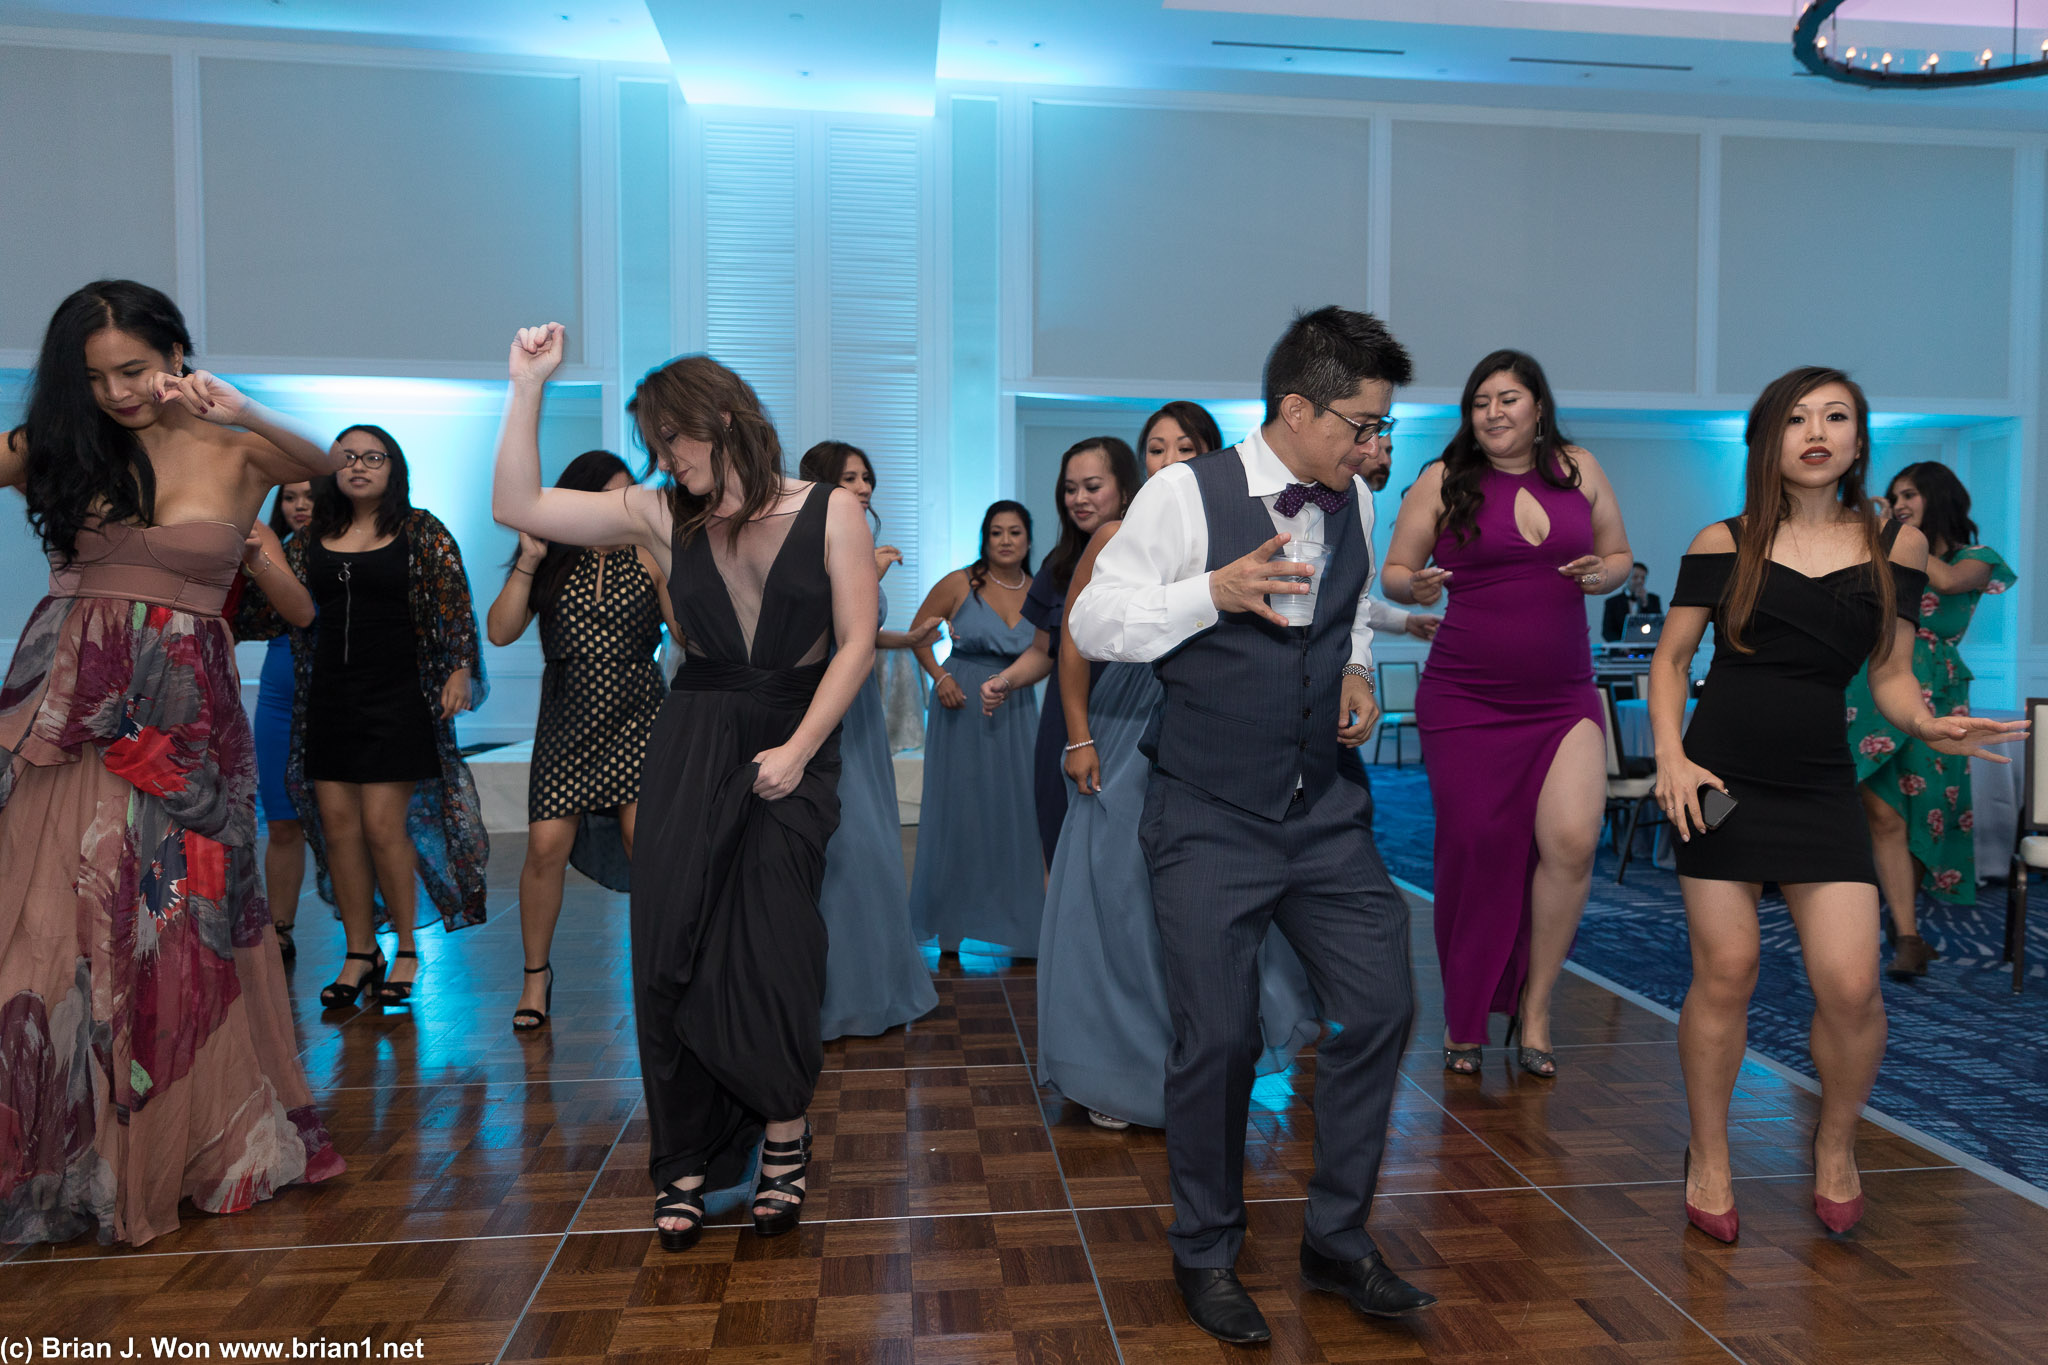 Not sure which song this is, but everyone's on the dance floor!